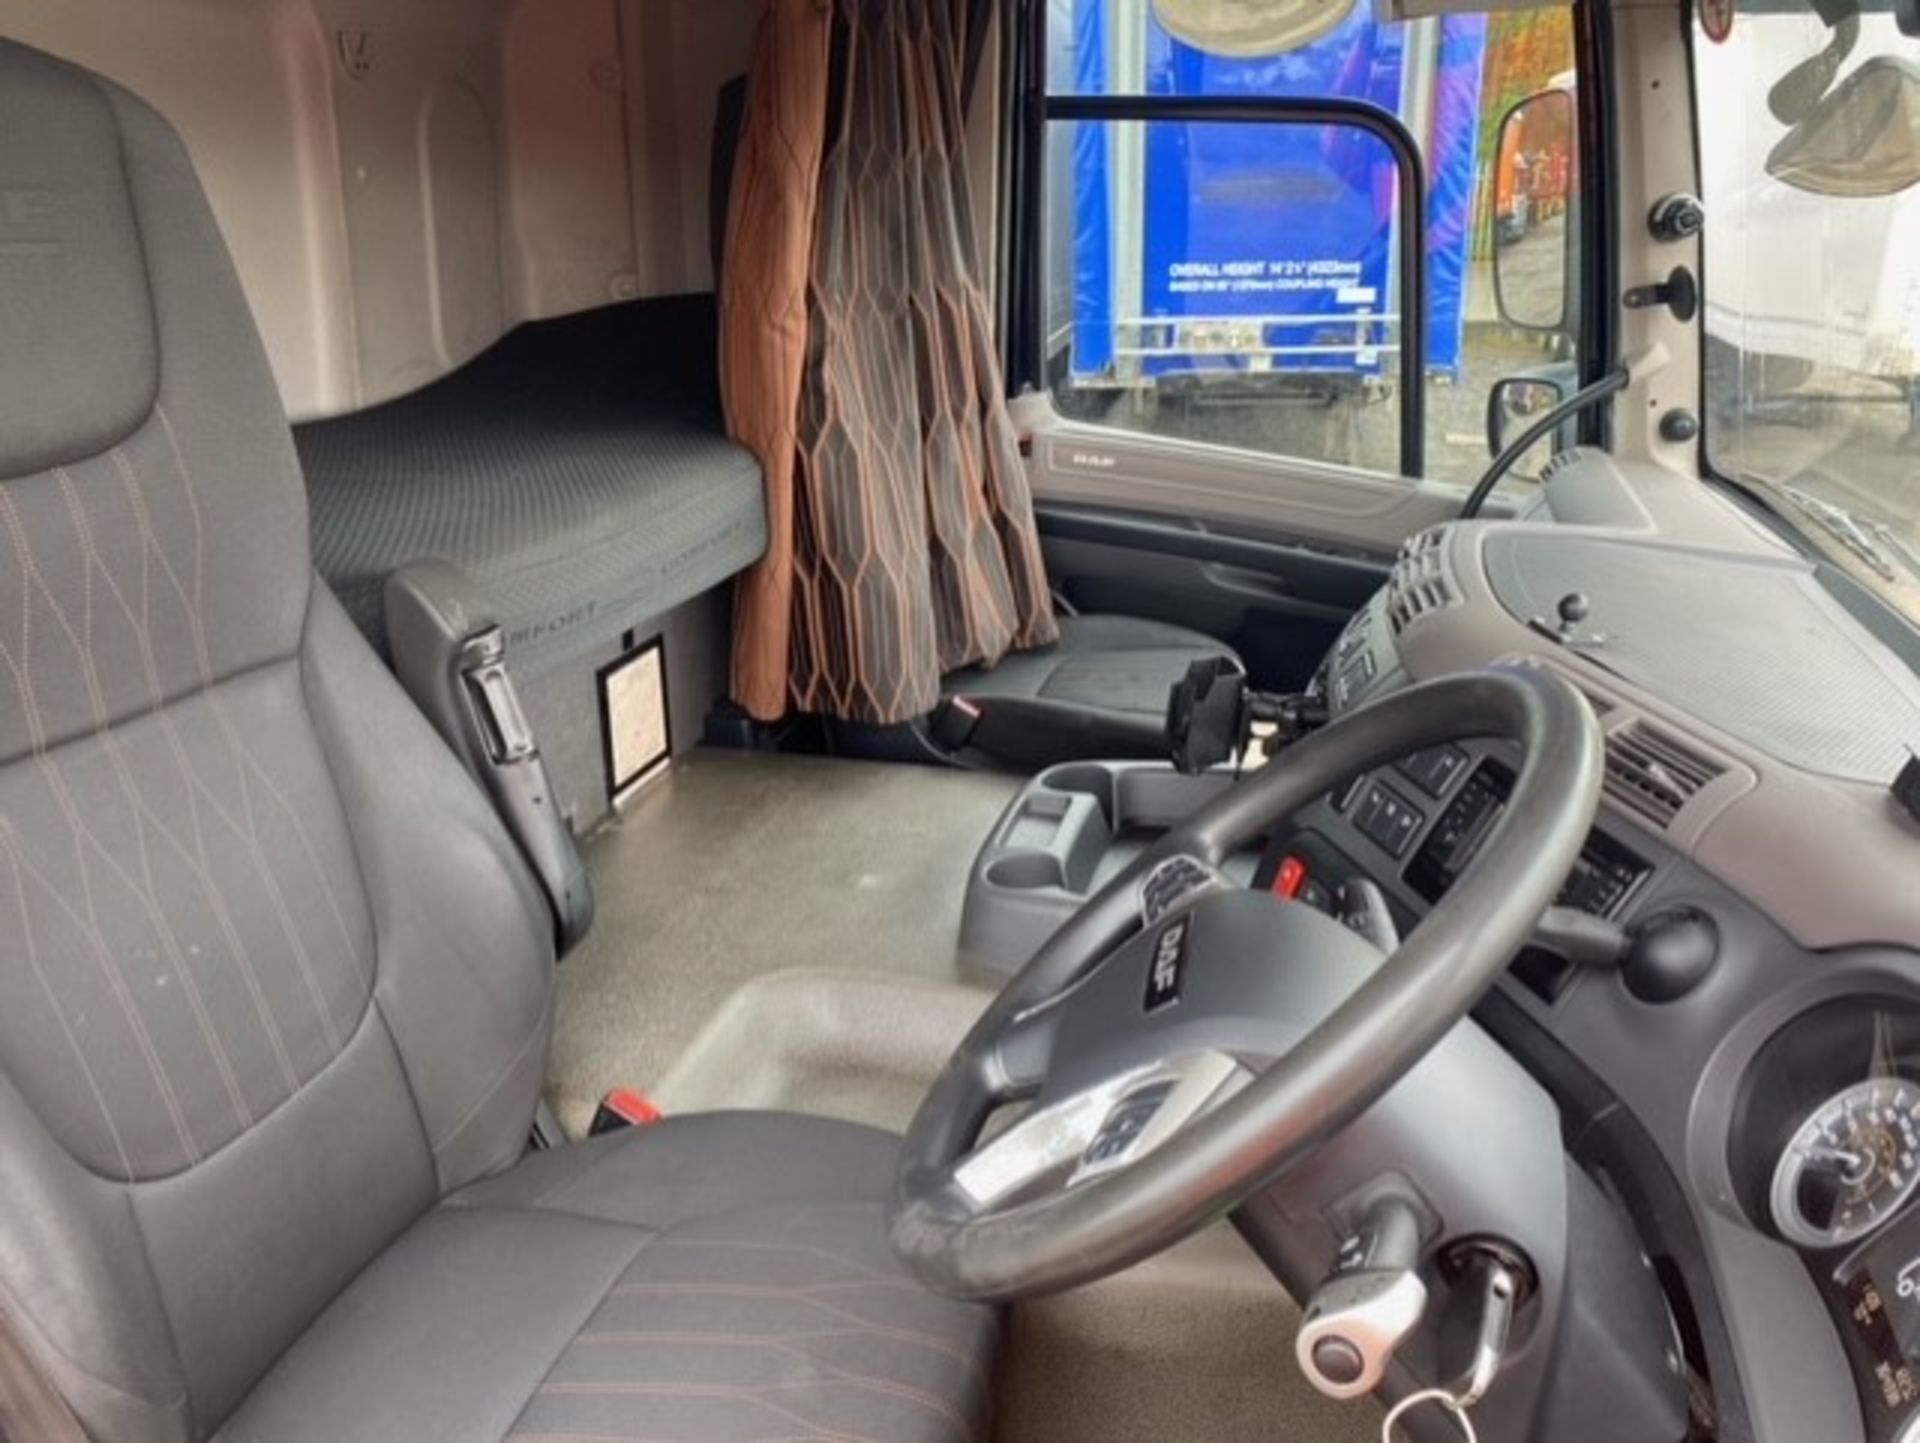 2019, DAF CF 260 - FN69 AXG (18 Ton Rigid Truck with Tail Lift) - Image 15 of 16